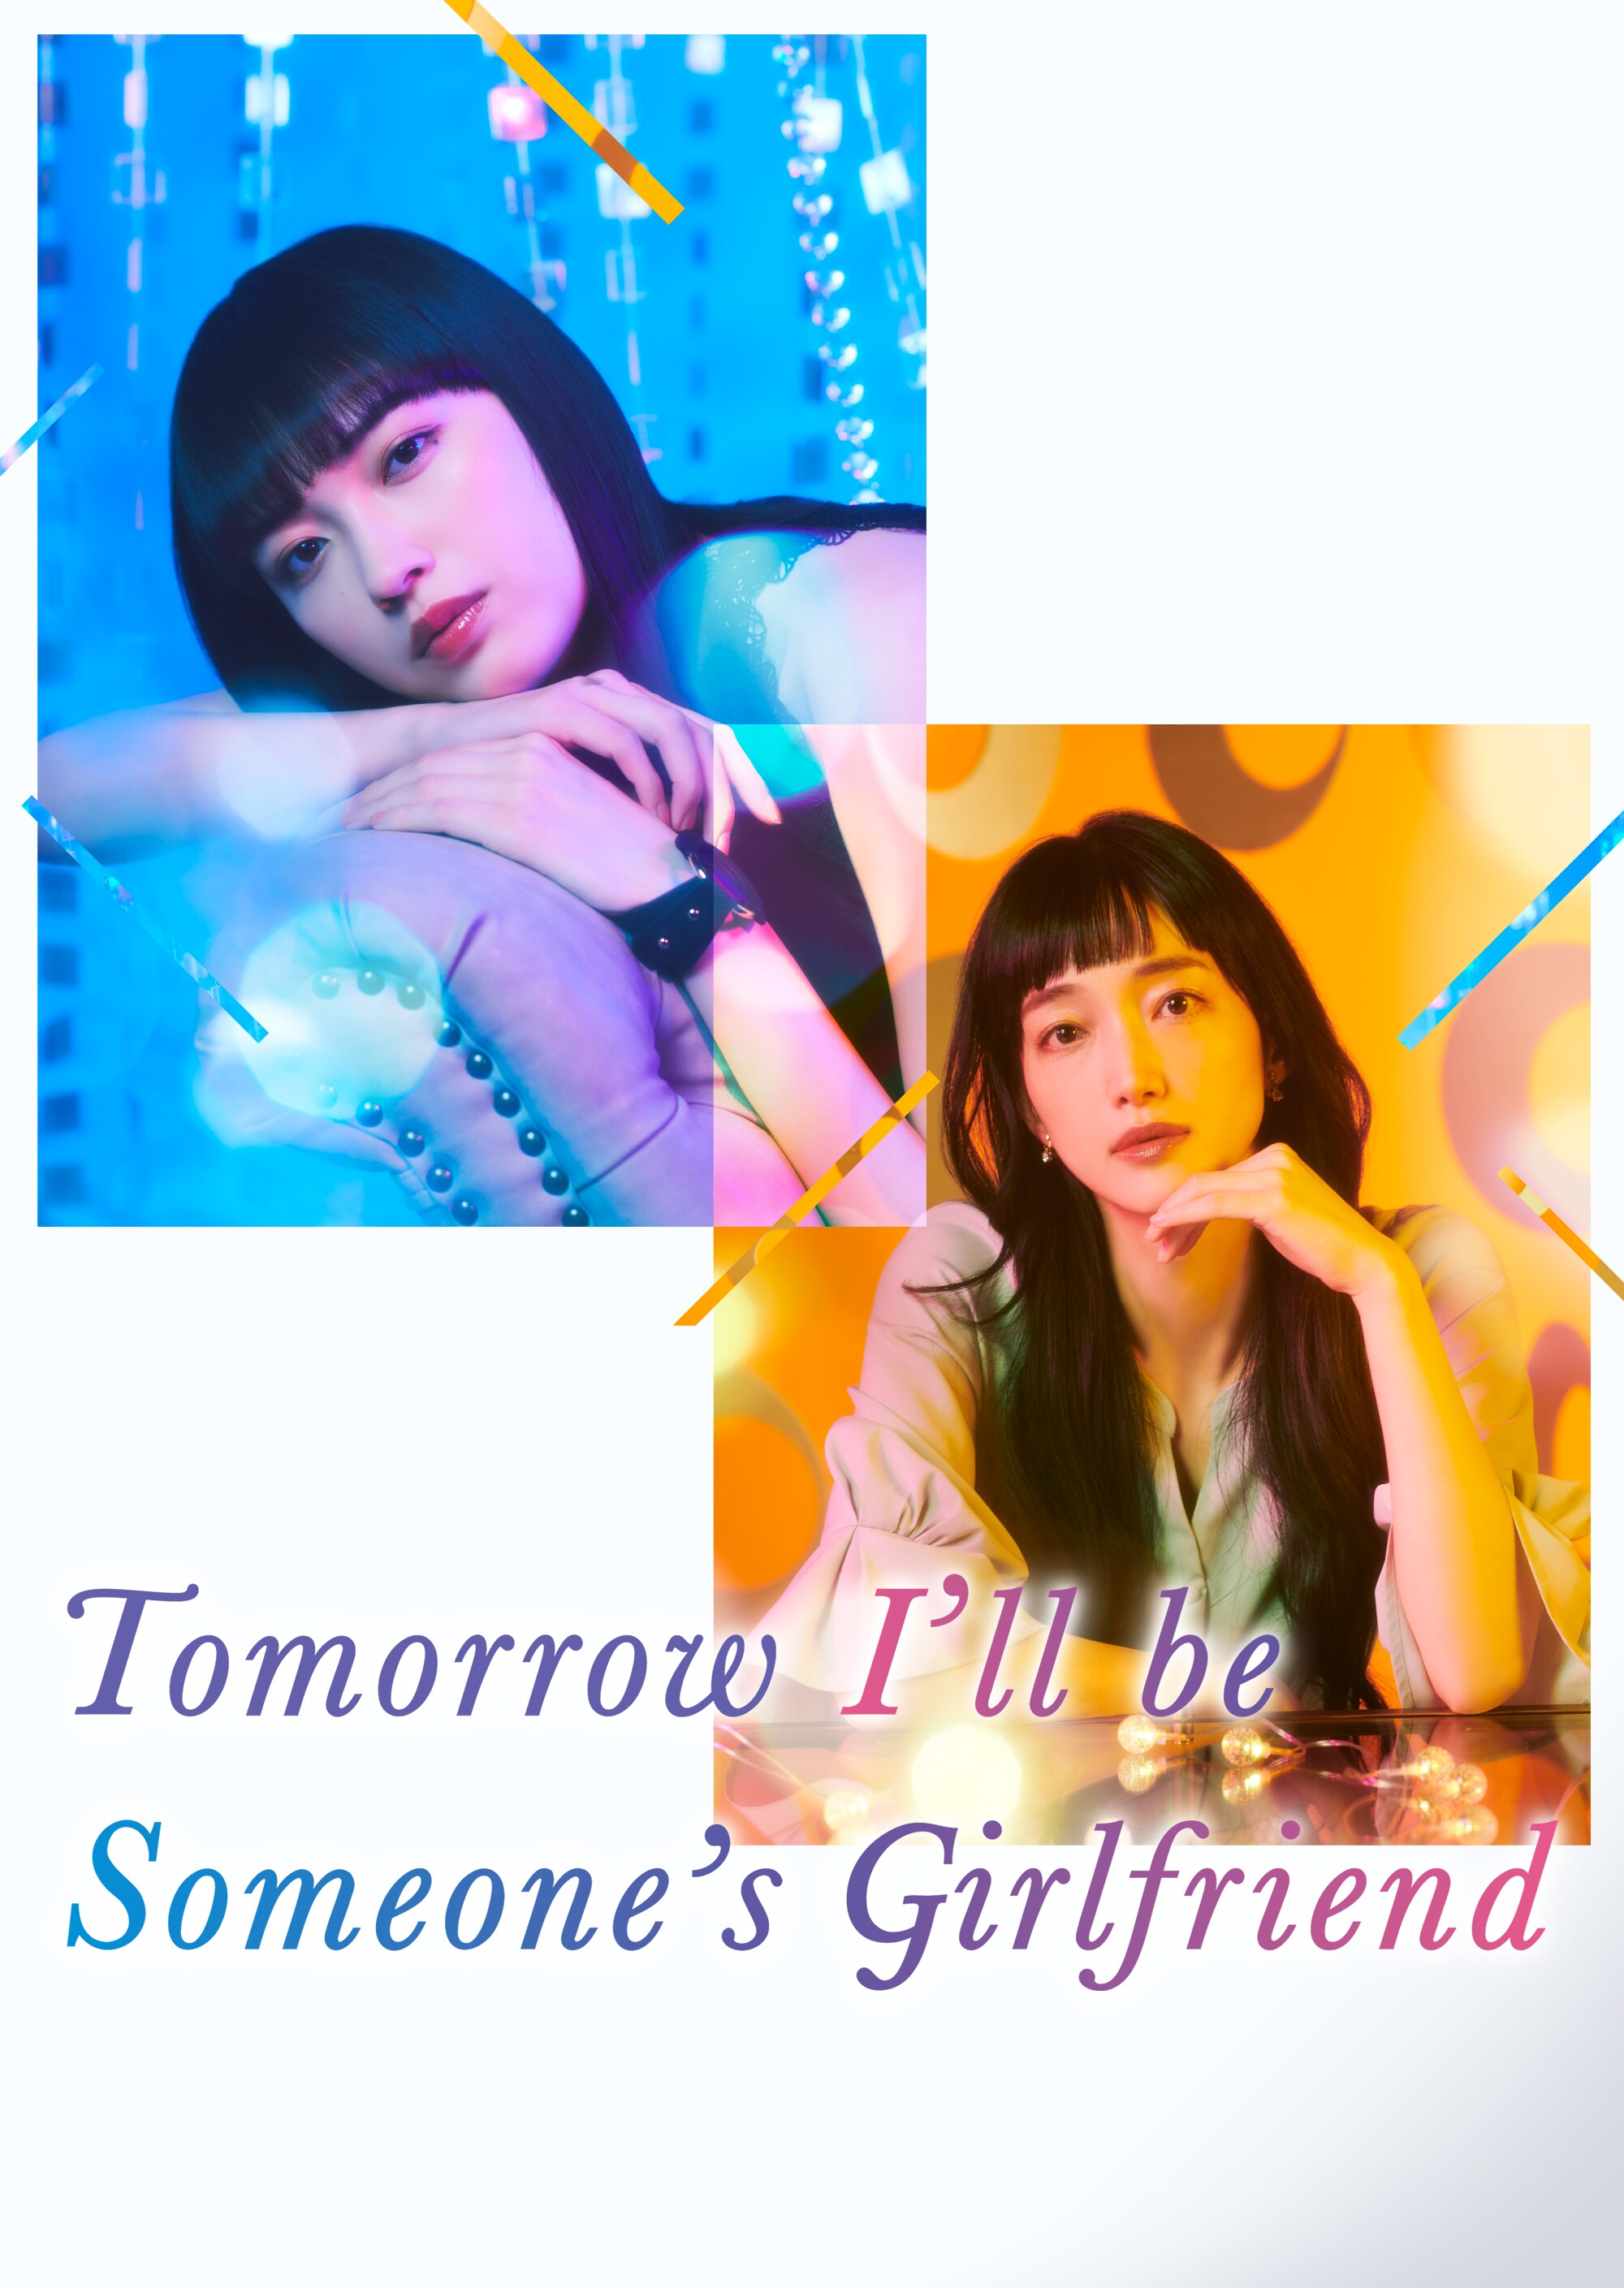 Tomorrow, I'll be someone’s girlfriend S2 | now streaming